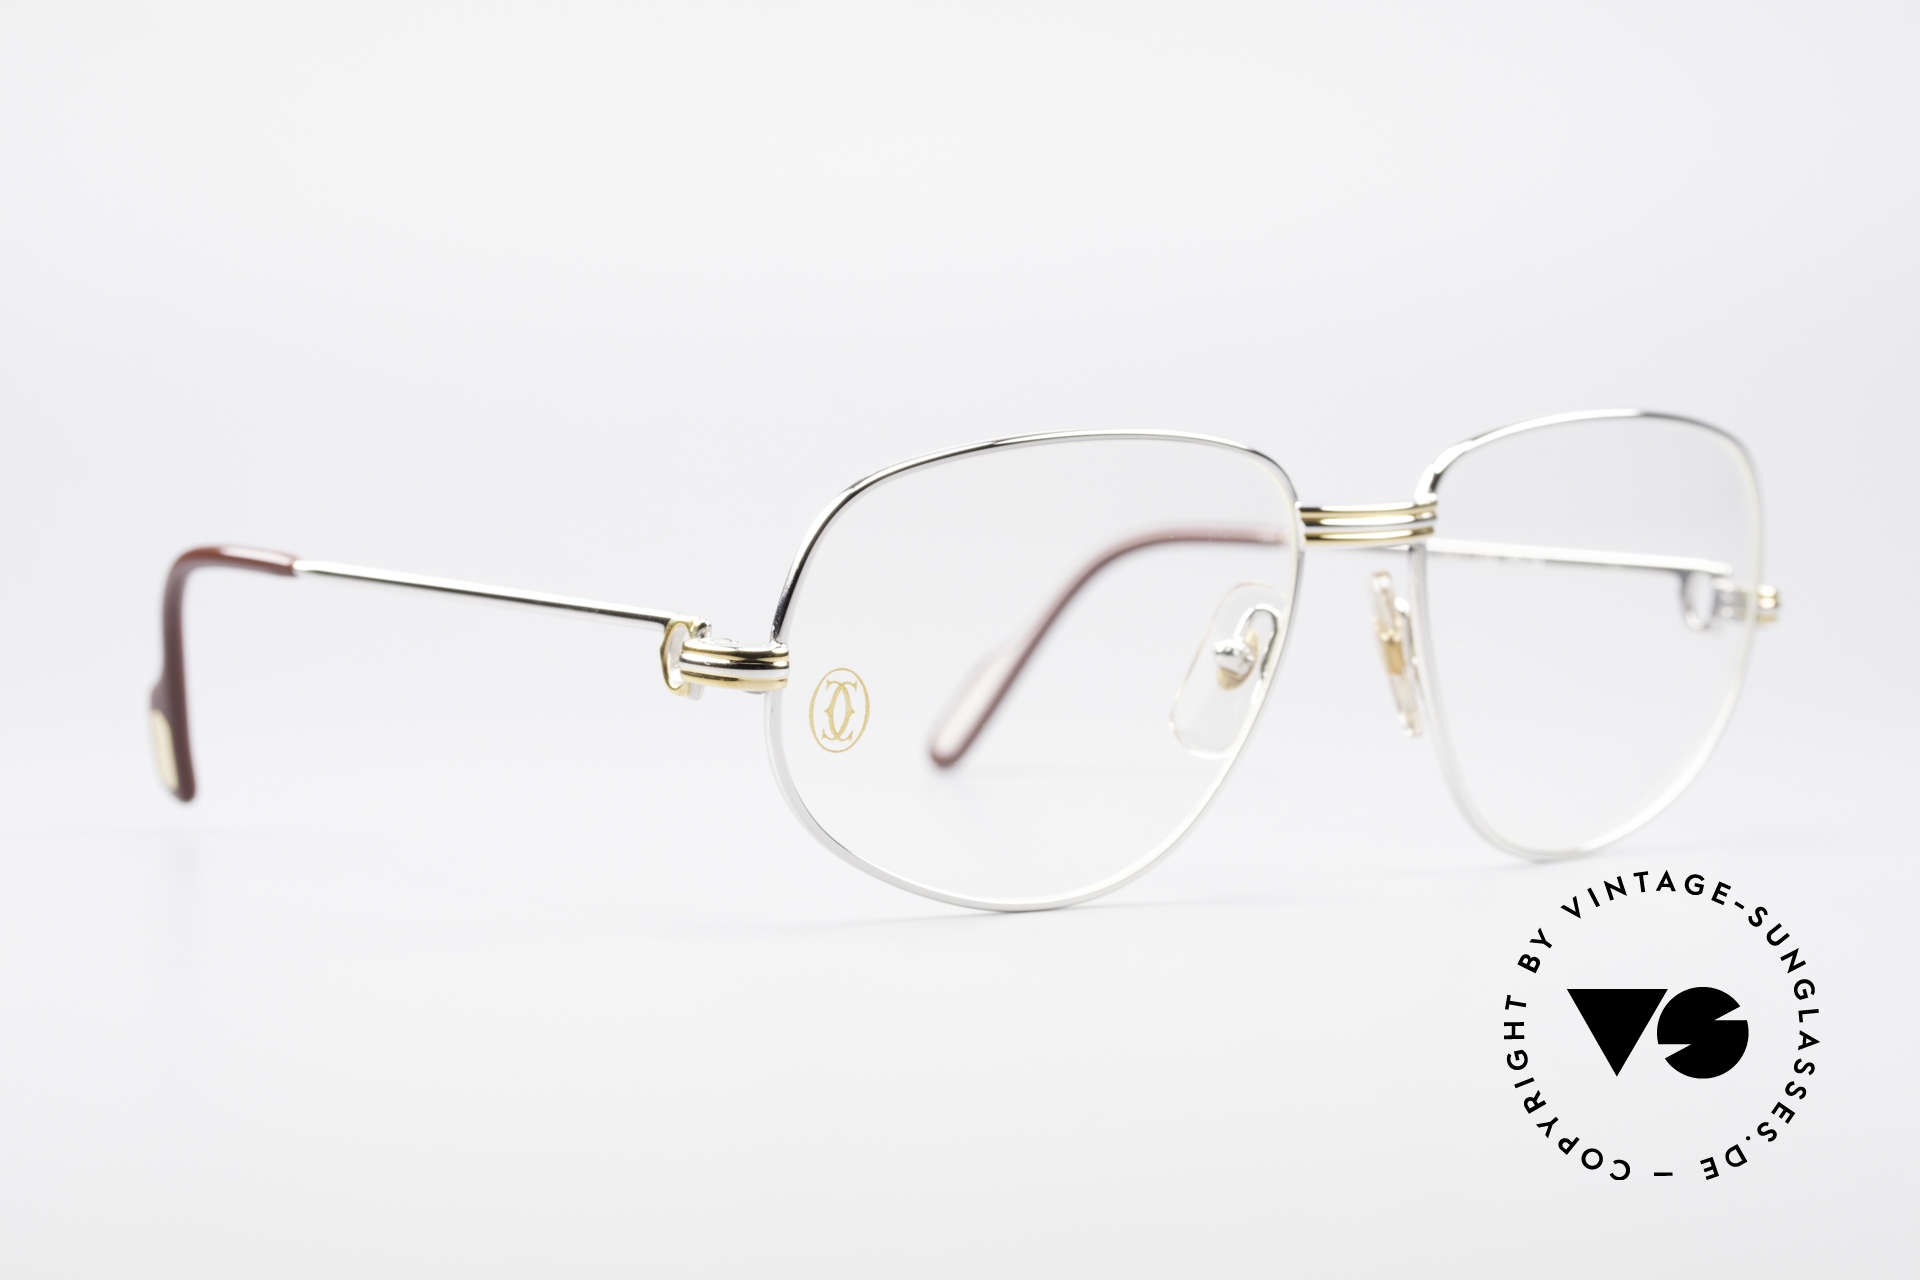 Cartier Romance LC - M Platinum Finish Glasses, this pair (with L. Cartier decor): MEDIUM size 56-16, 130, Made for Men and Women